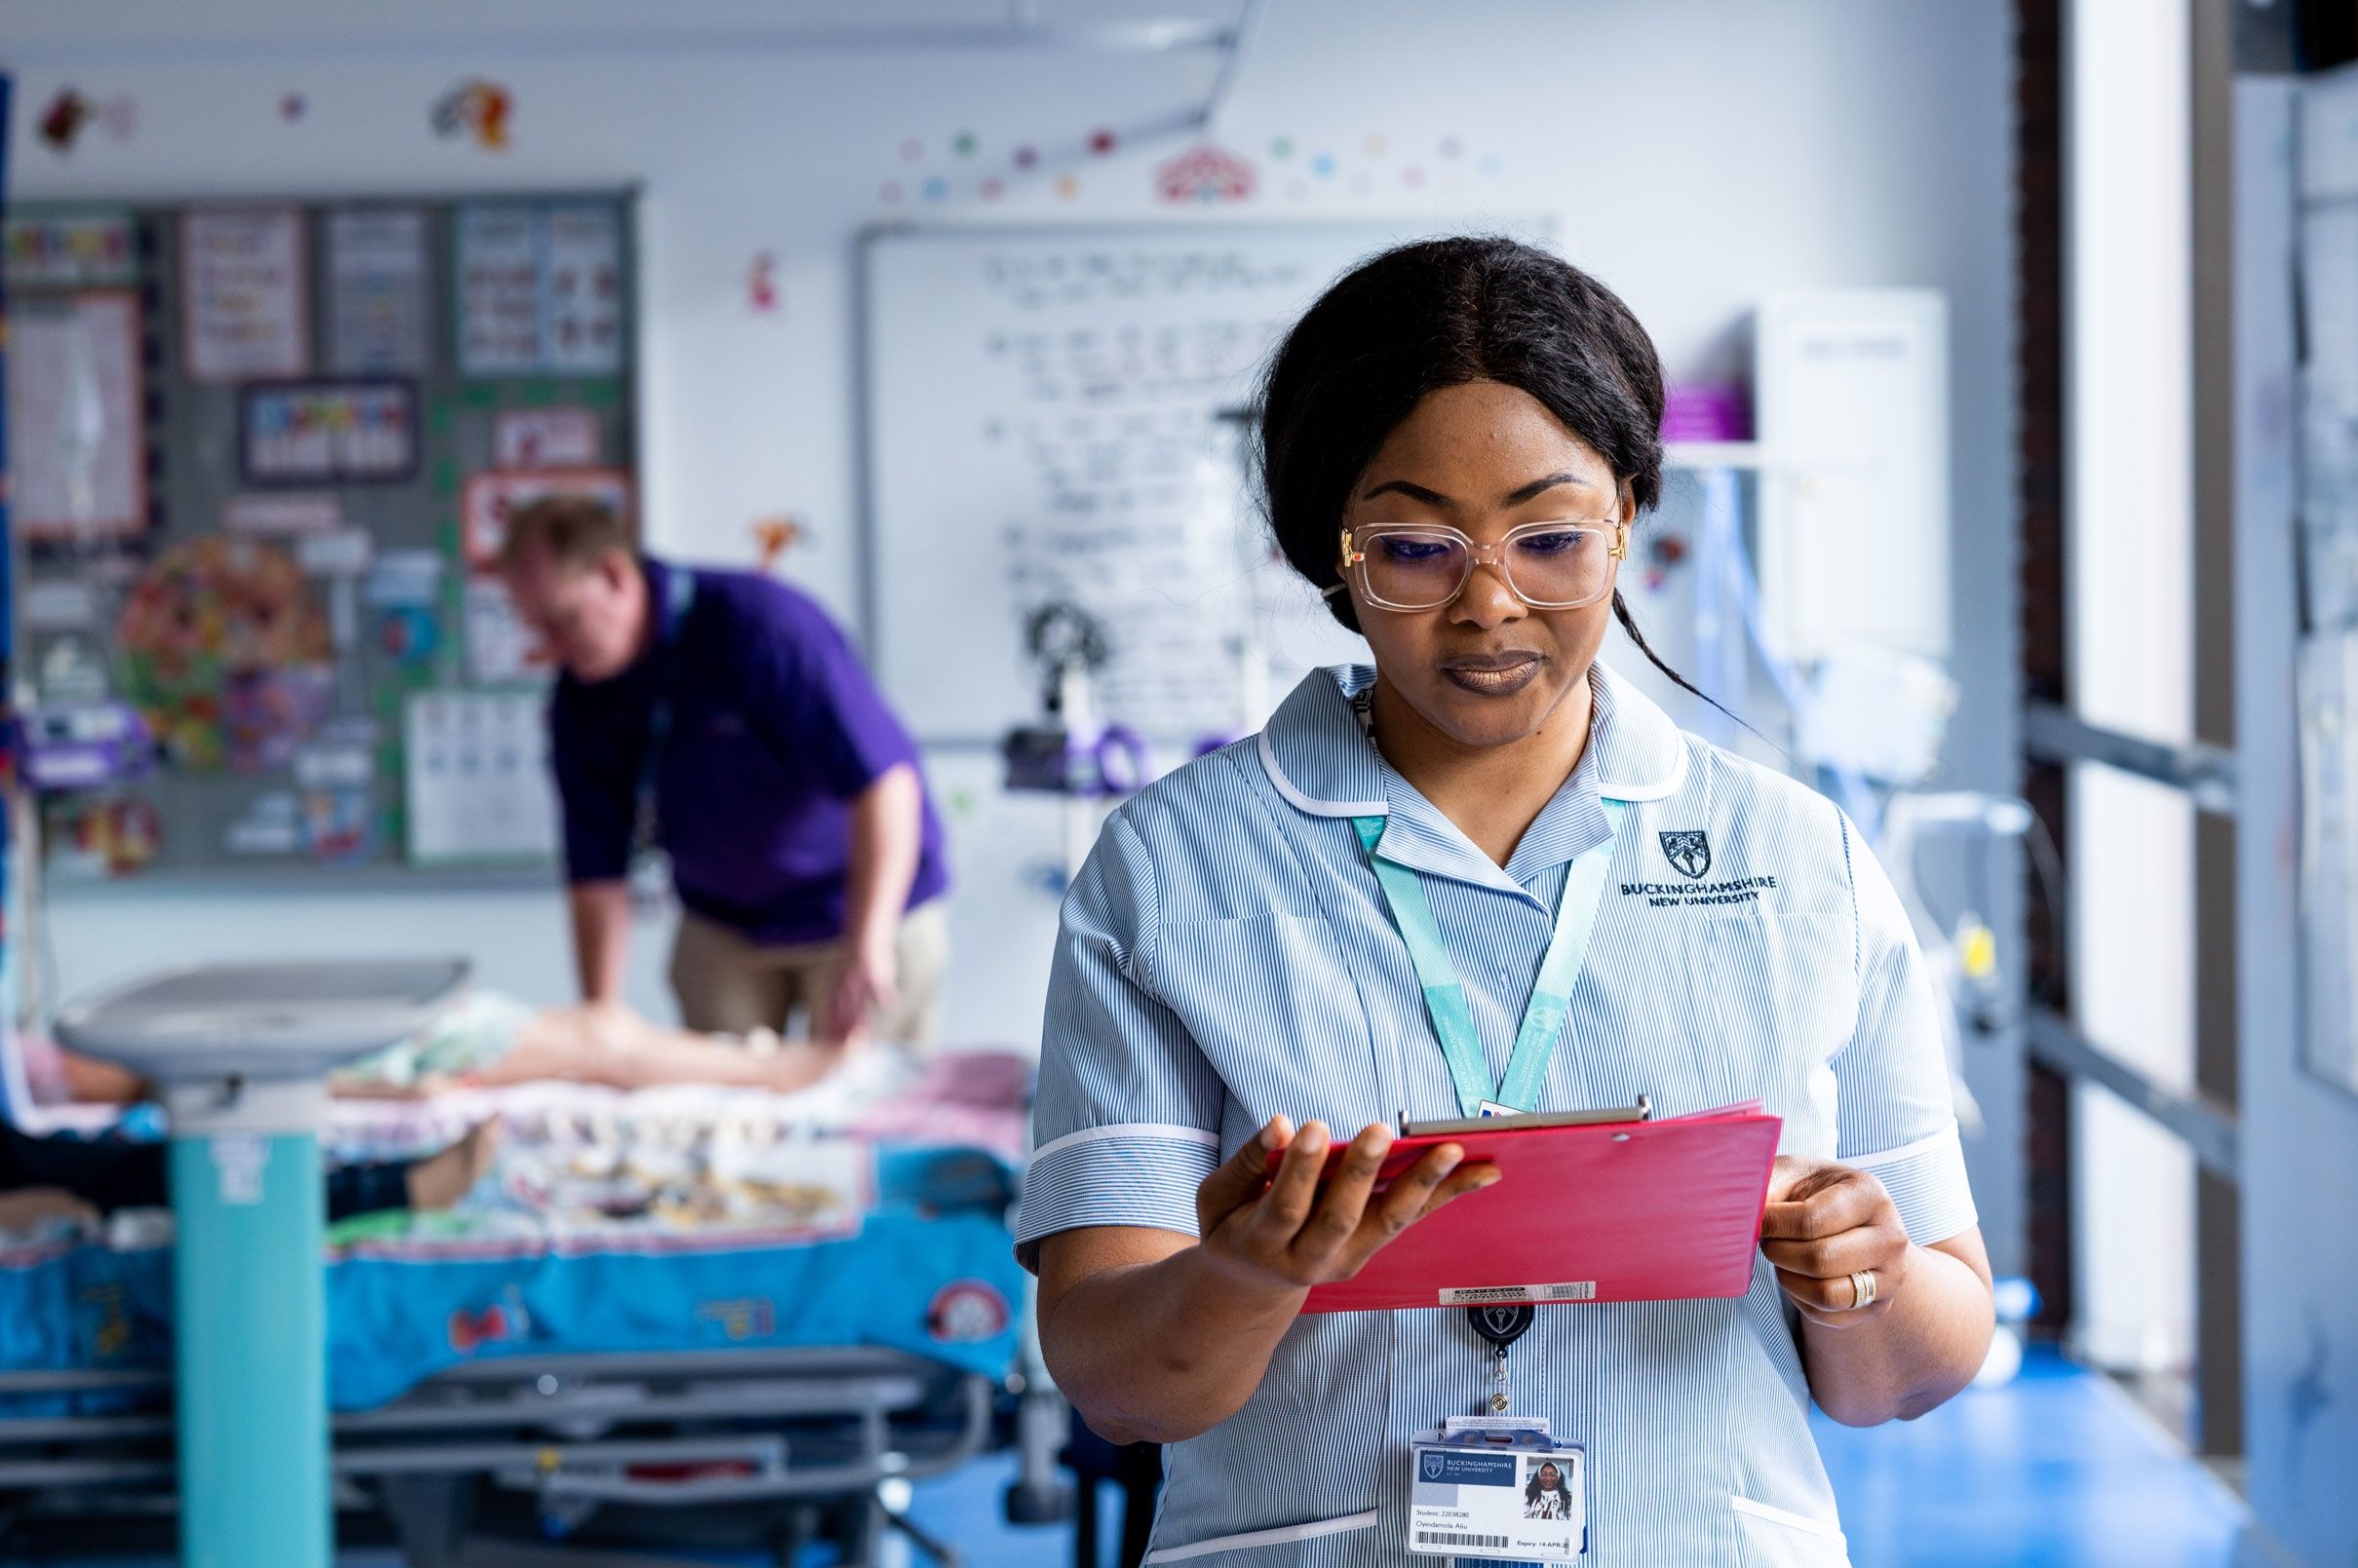 A student nurse in uniform stood in a simulation ward looking down at a tablet screen